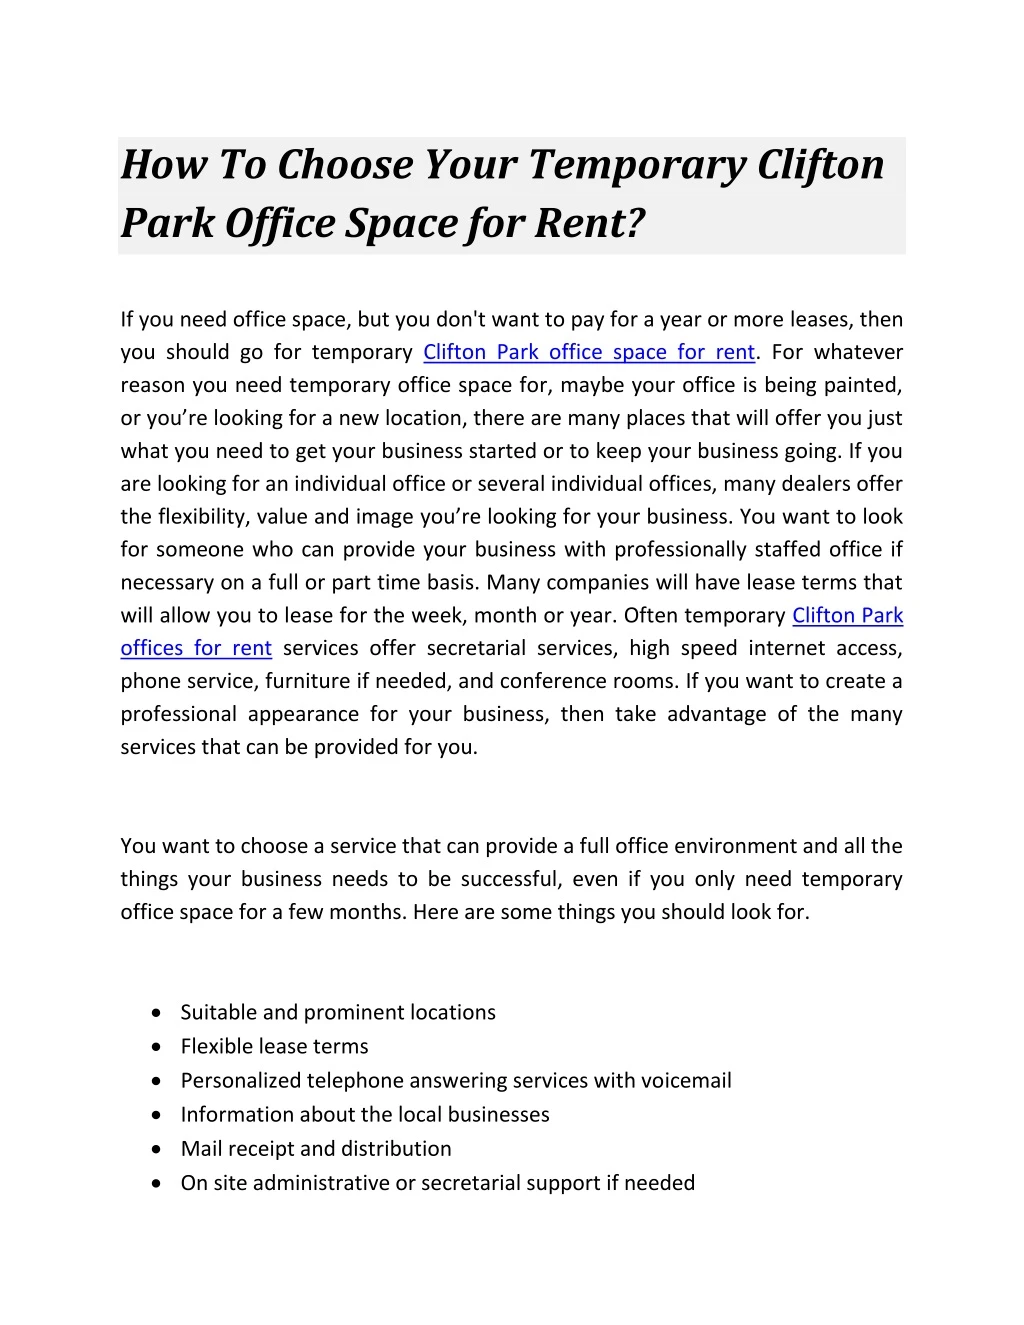 how to choose your temporary clifton park office